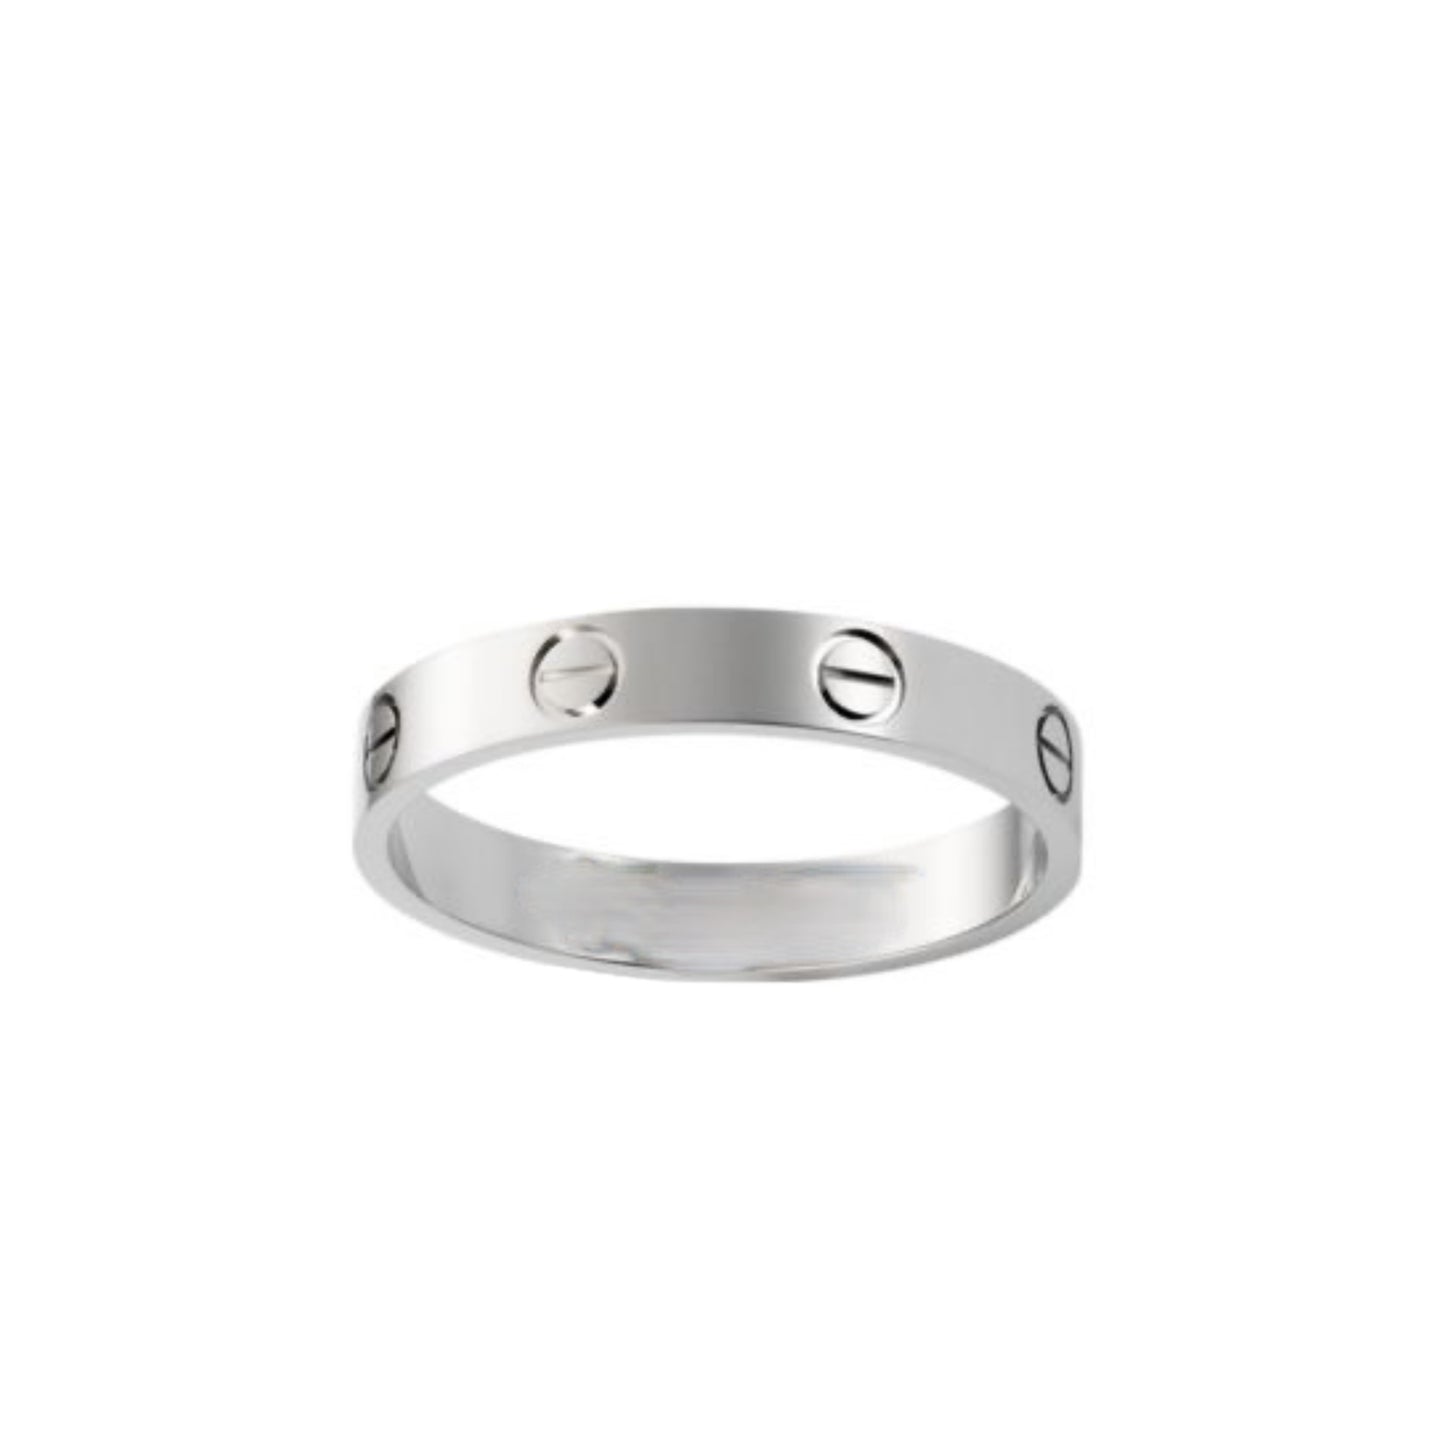 Silver C ring